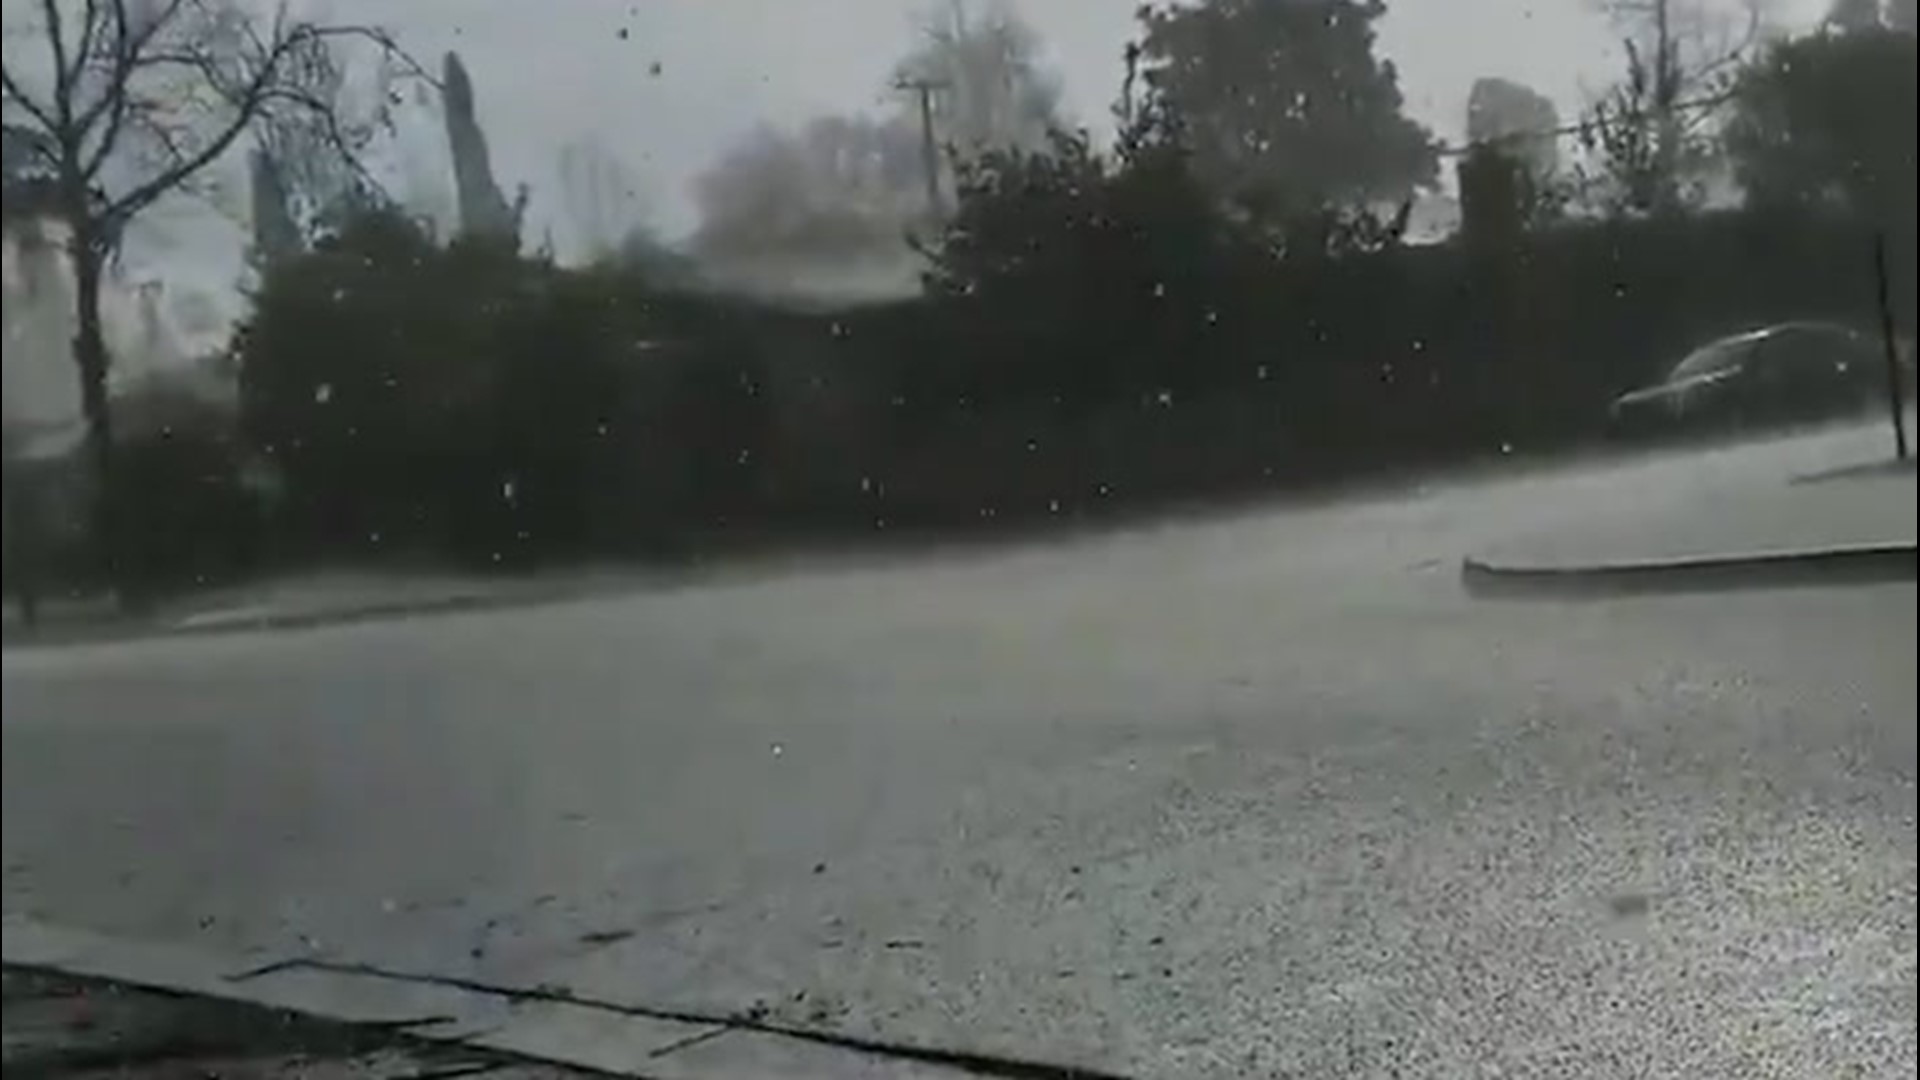 Hail hits the streets in California